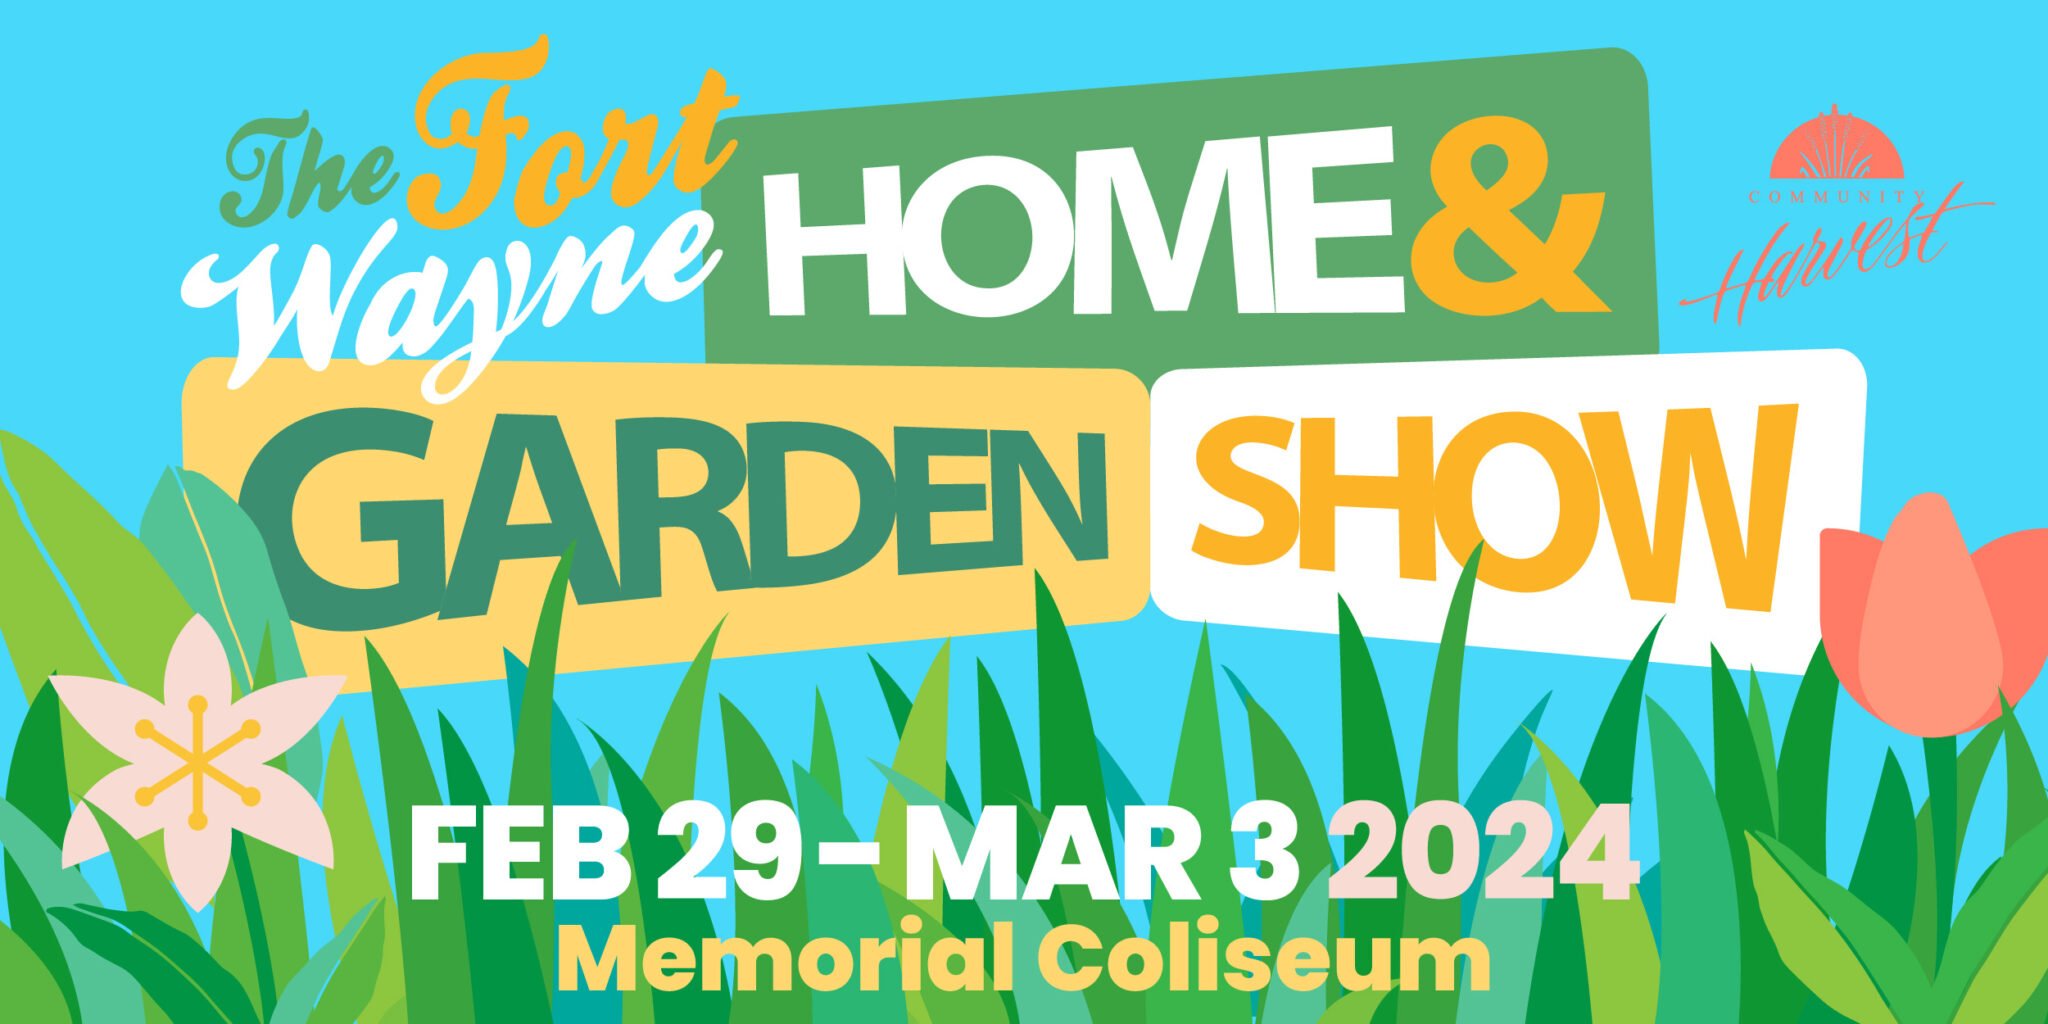 Come See Us at Home & Garden Show 2024! Community Harvest Food Bank